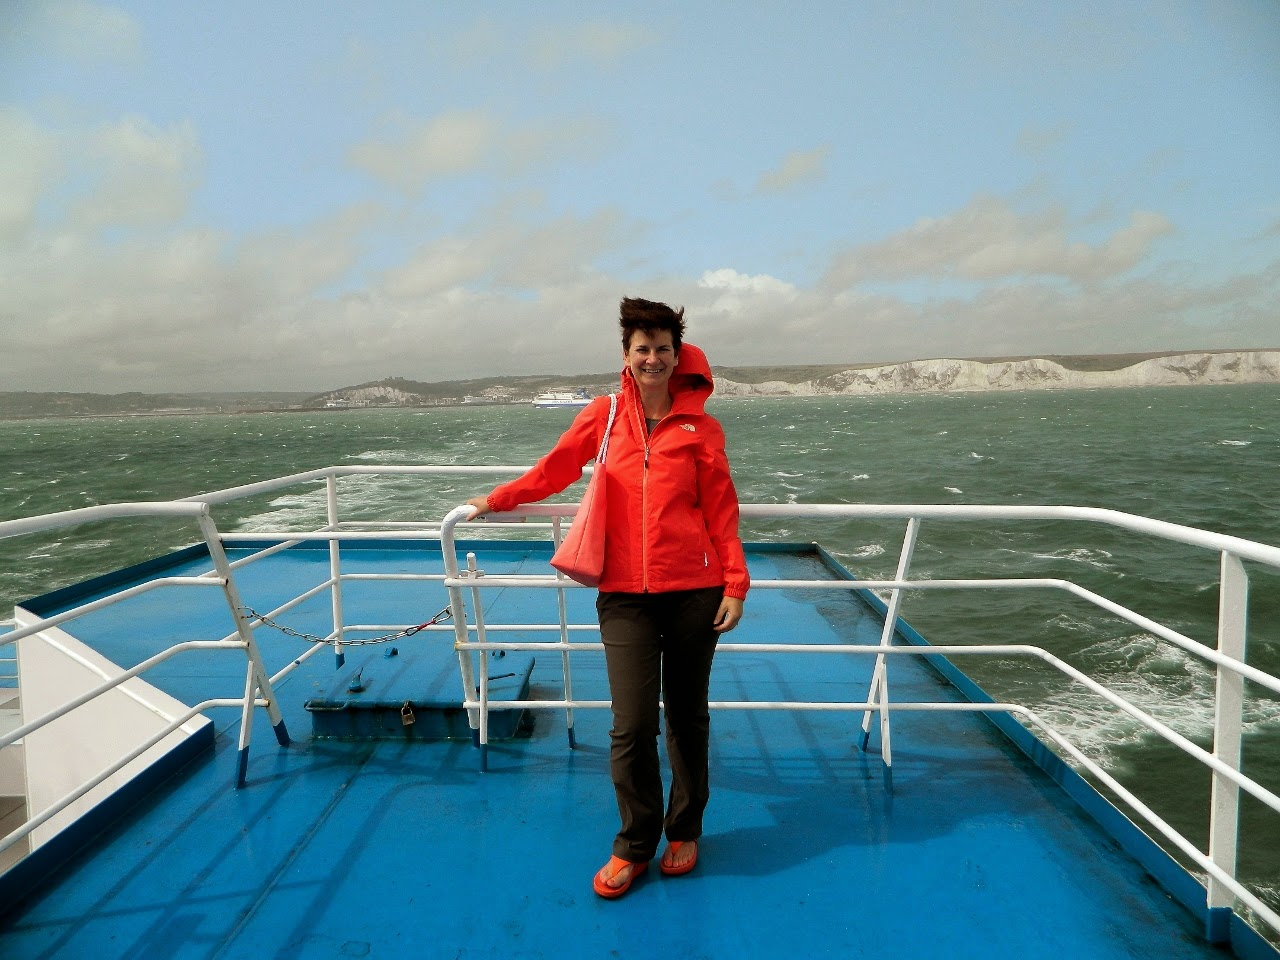 Leaving home: from Dartford to Dover